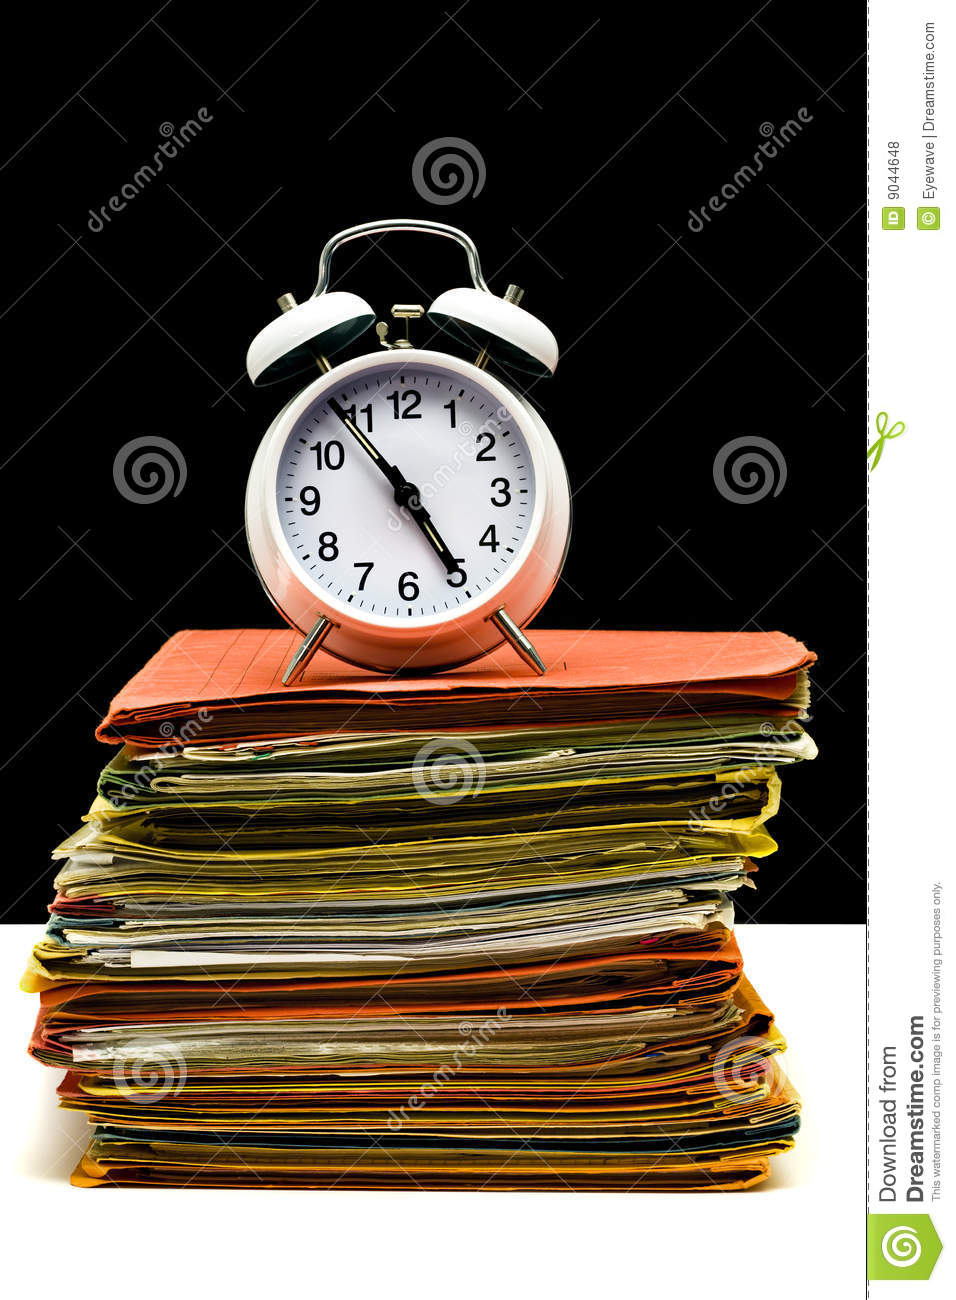 Too Much Work Too Little Time Royalty Free Stock Photos   Image